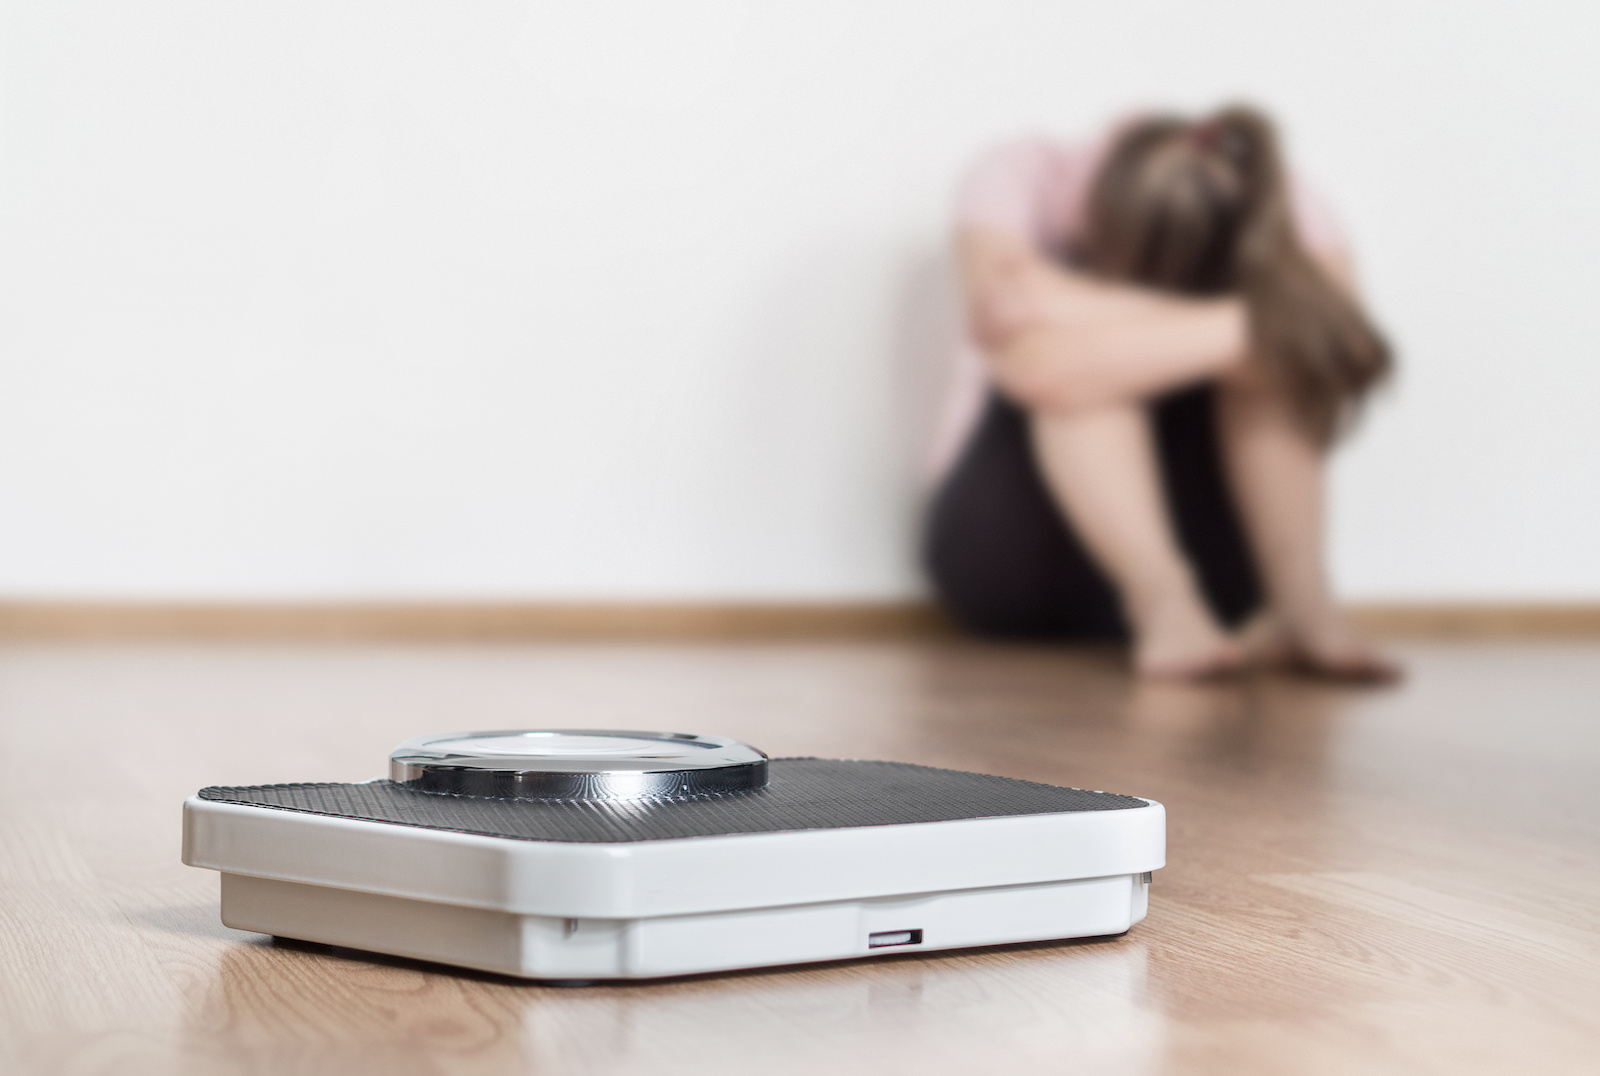 Why You Need To Get Help If You Have An Eating Disorder